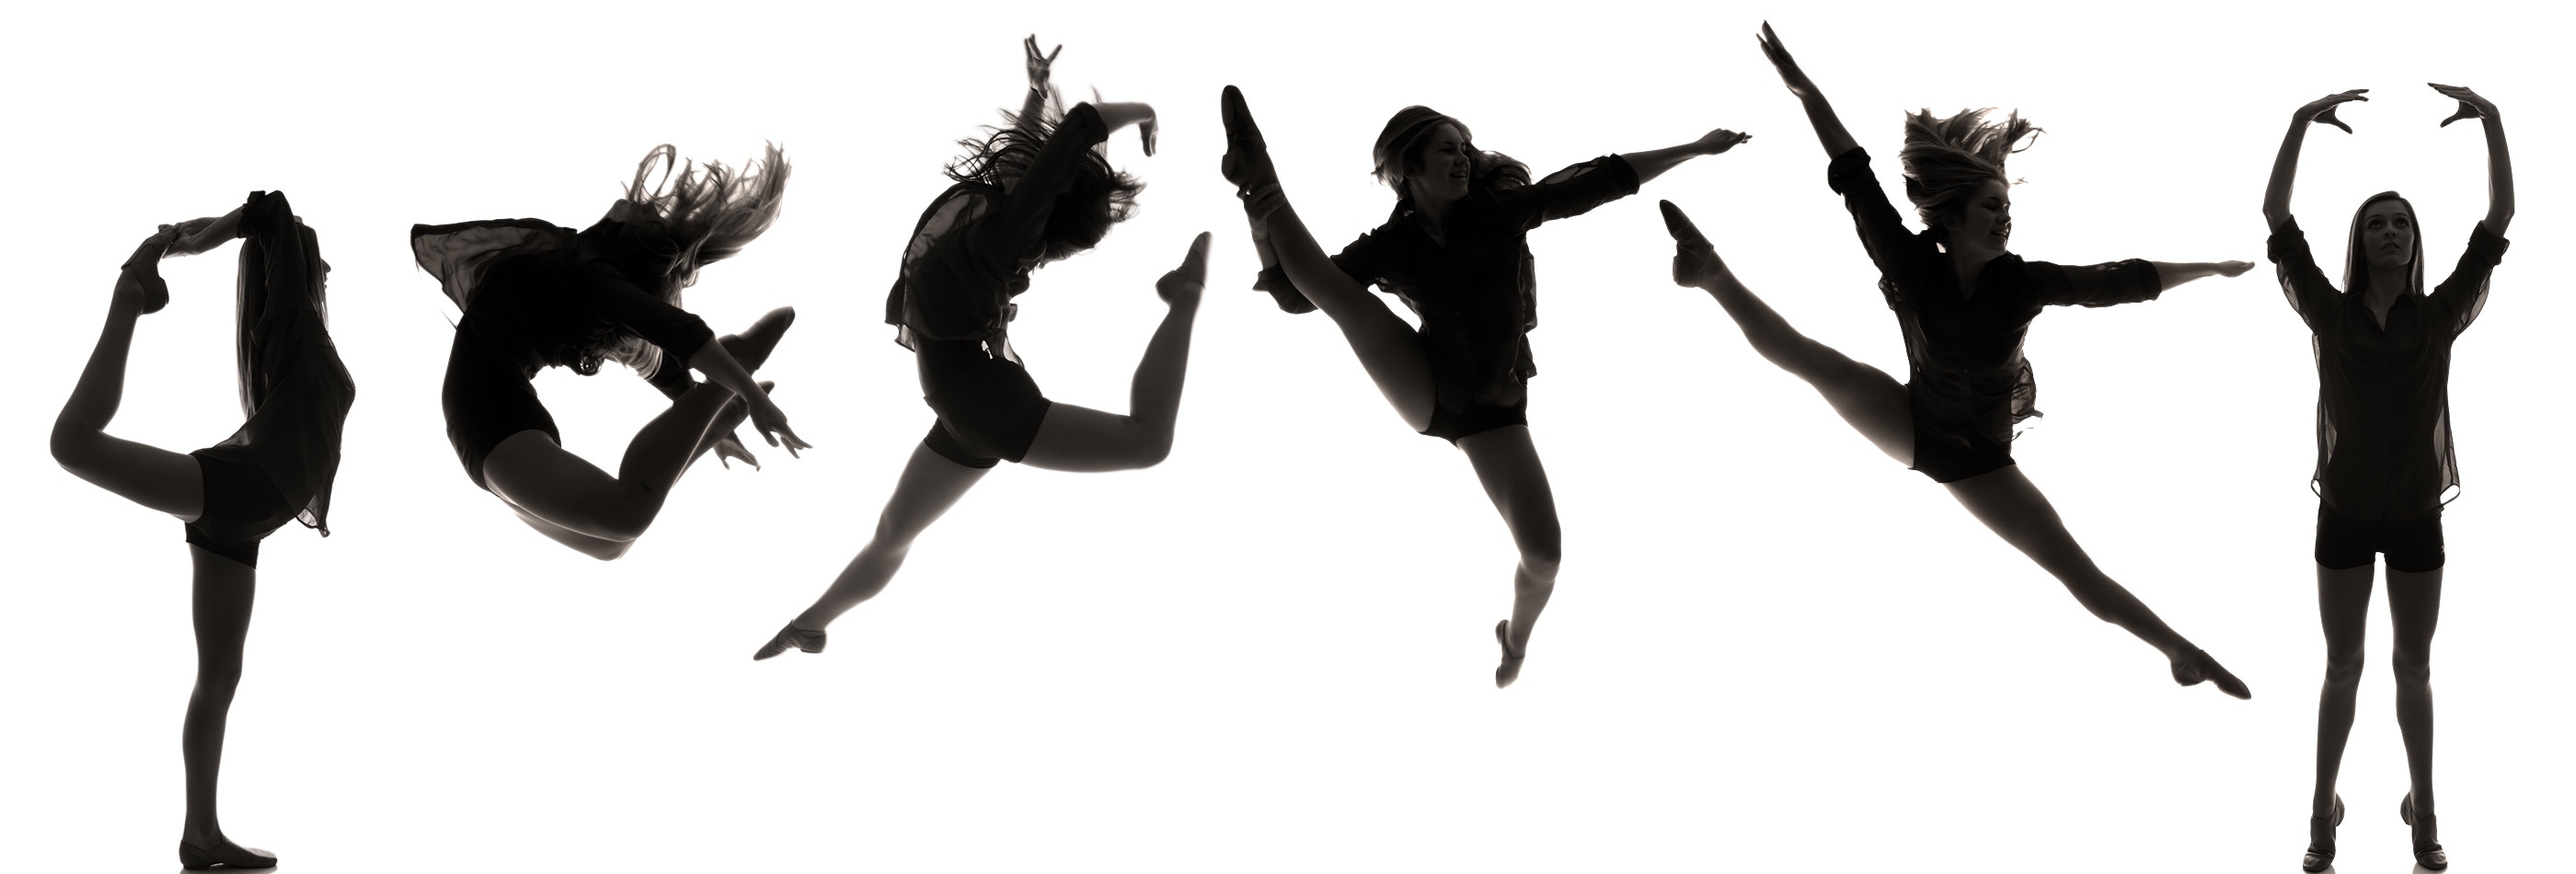 free clipart images dancers - photo #26